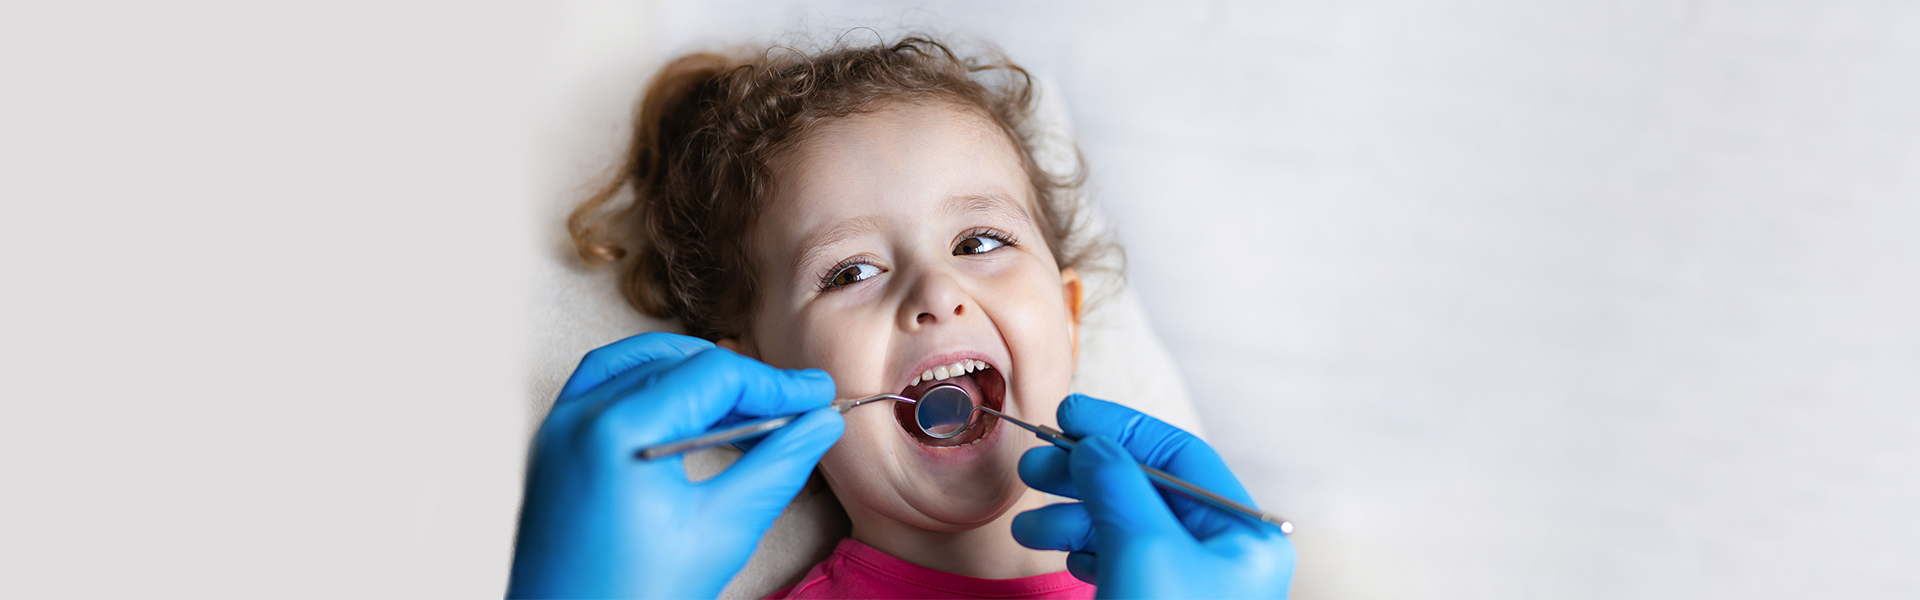 when-should-a-child-see-a-dentist-for-the-first-time